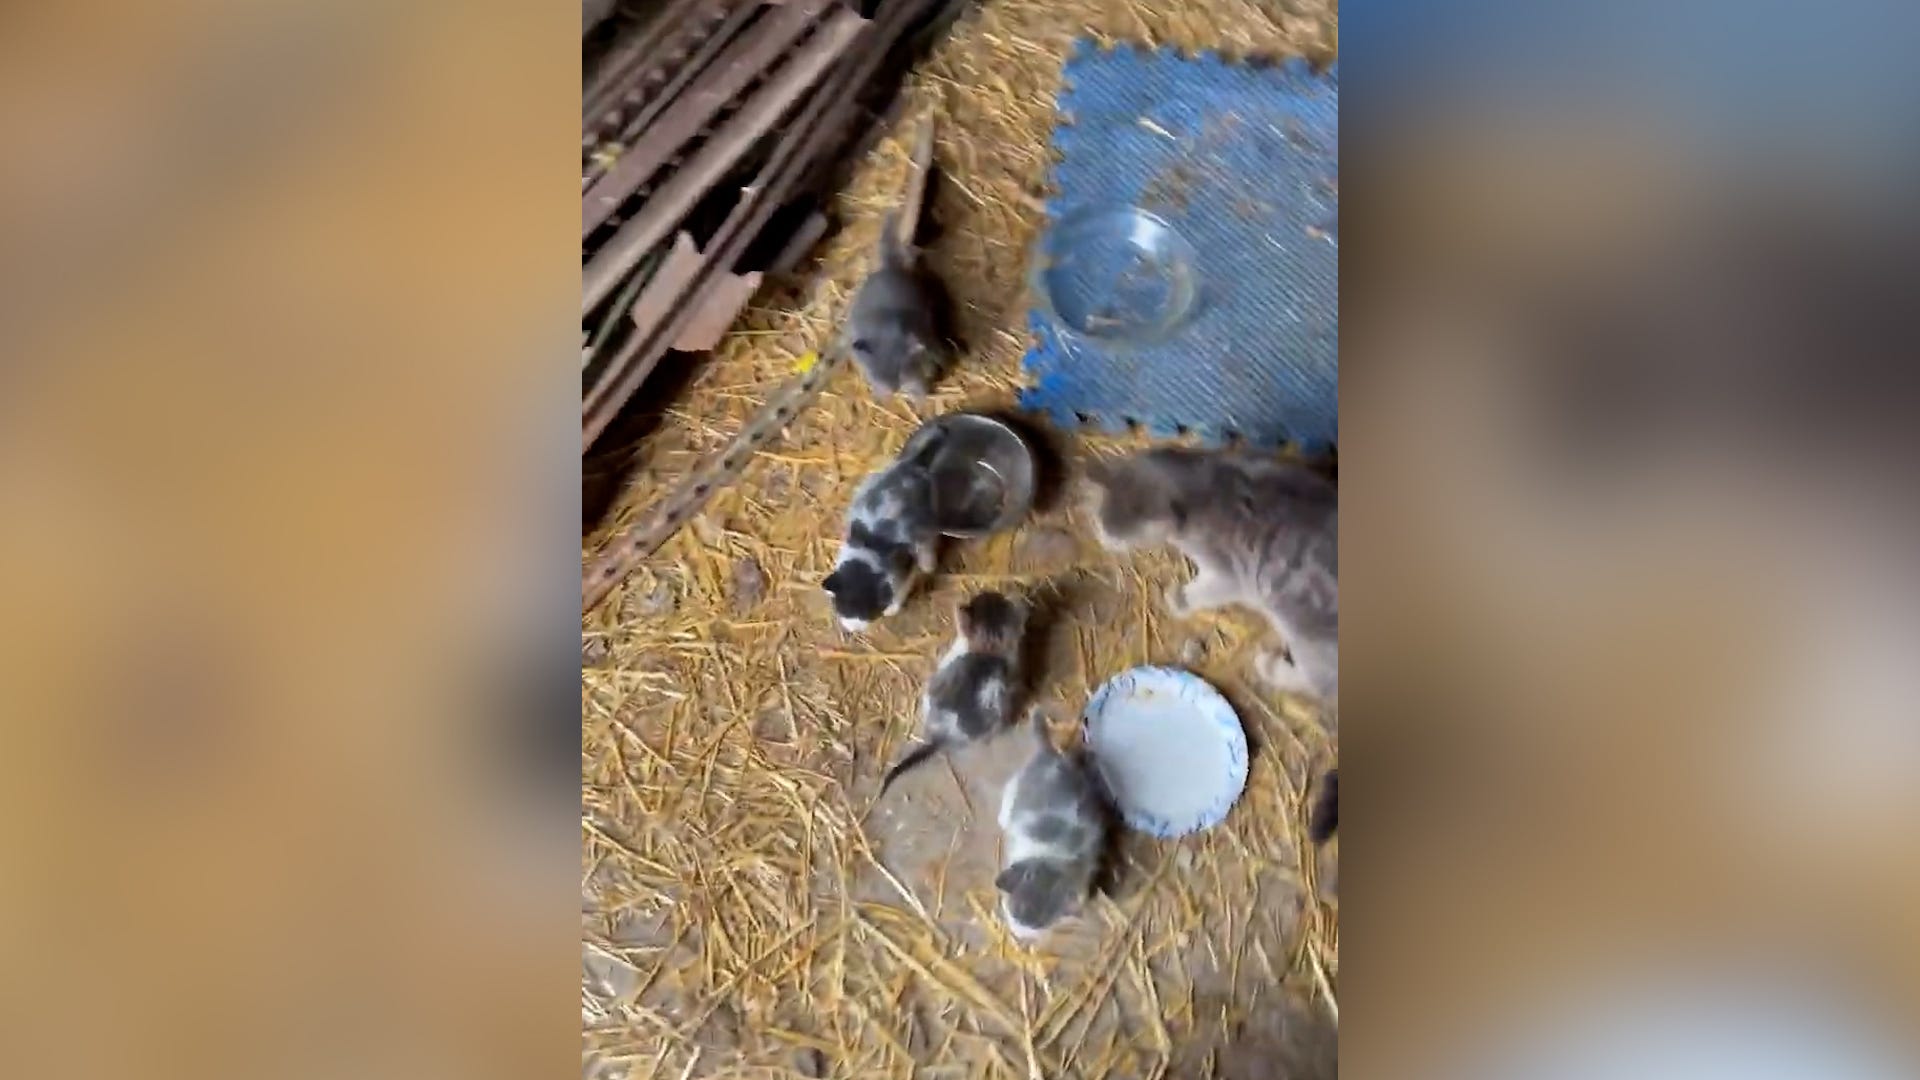 Trio of frantically meowing cats lead woman to adorable discovery: a litter of kittens